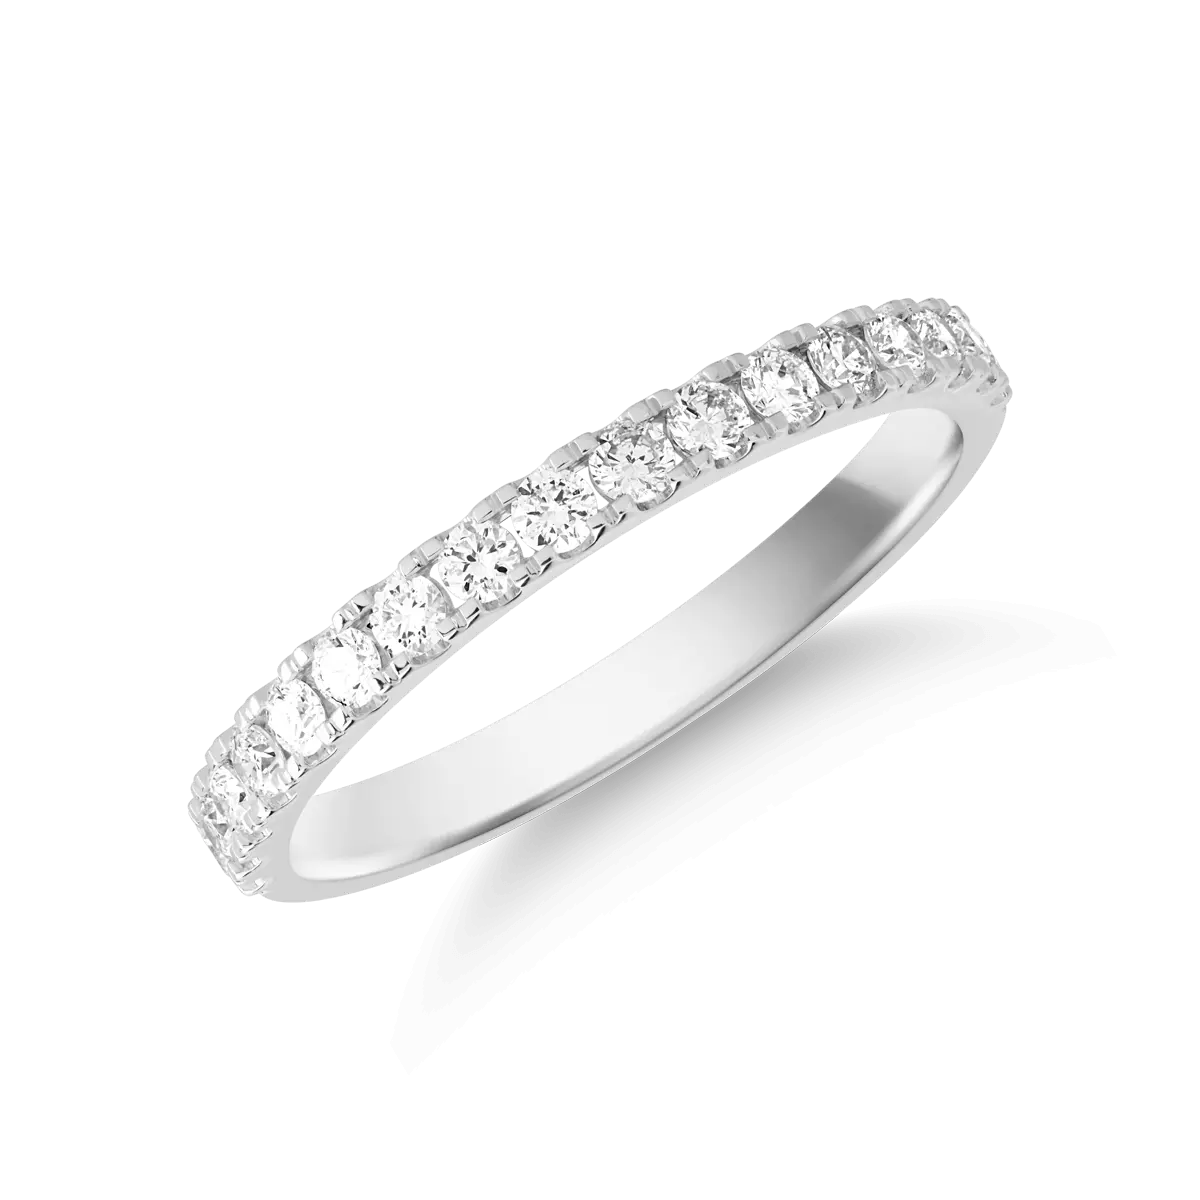 18K white gold ring with 0.31ct diamond